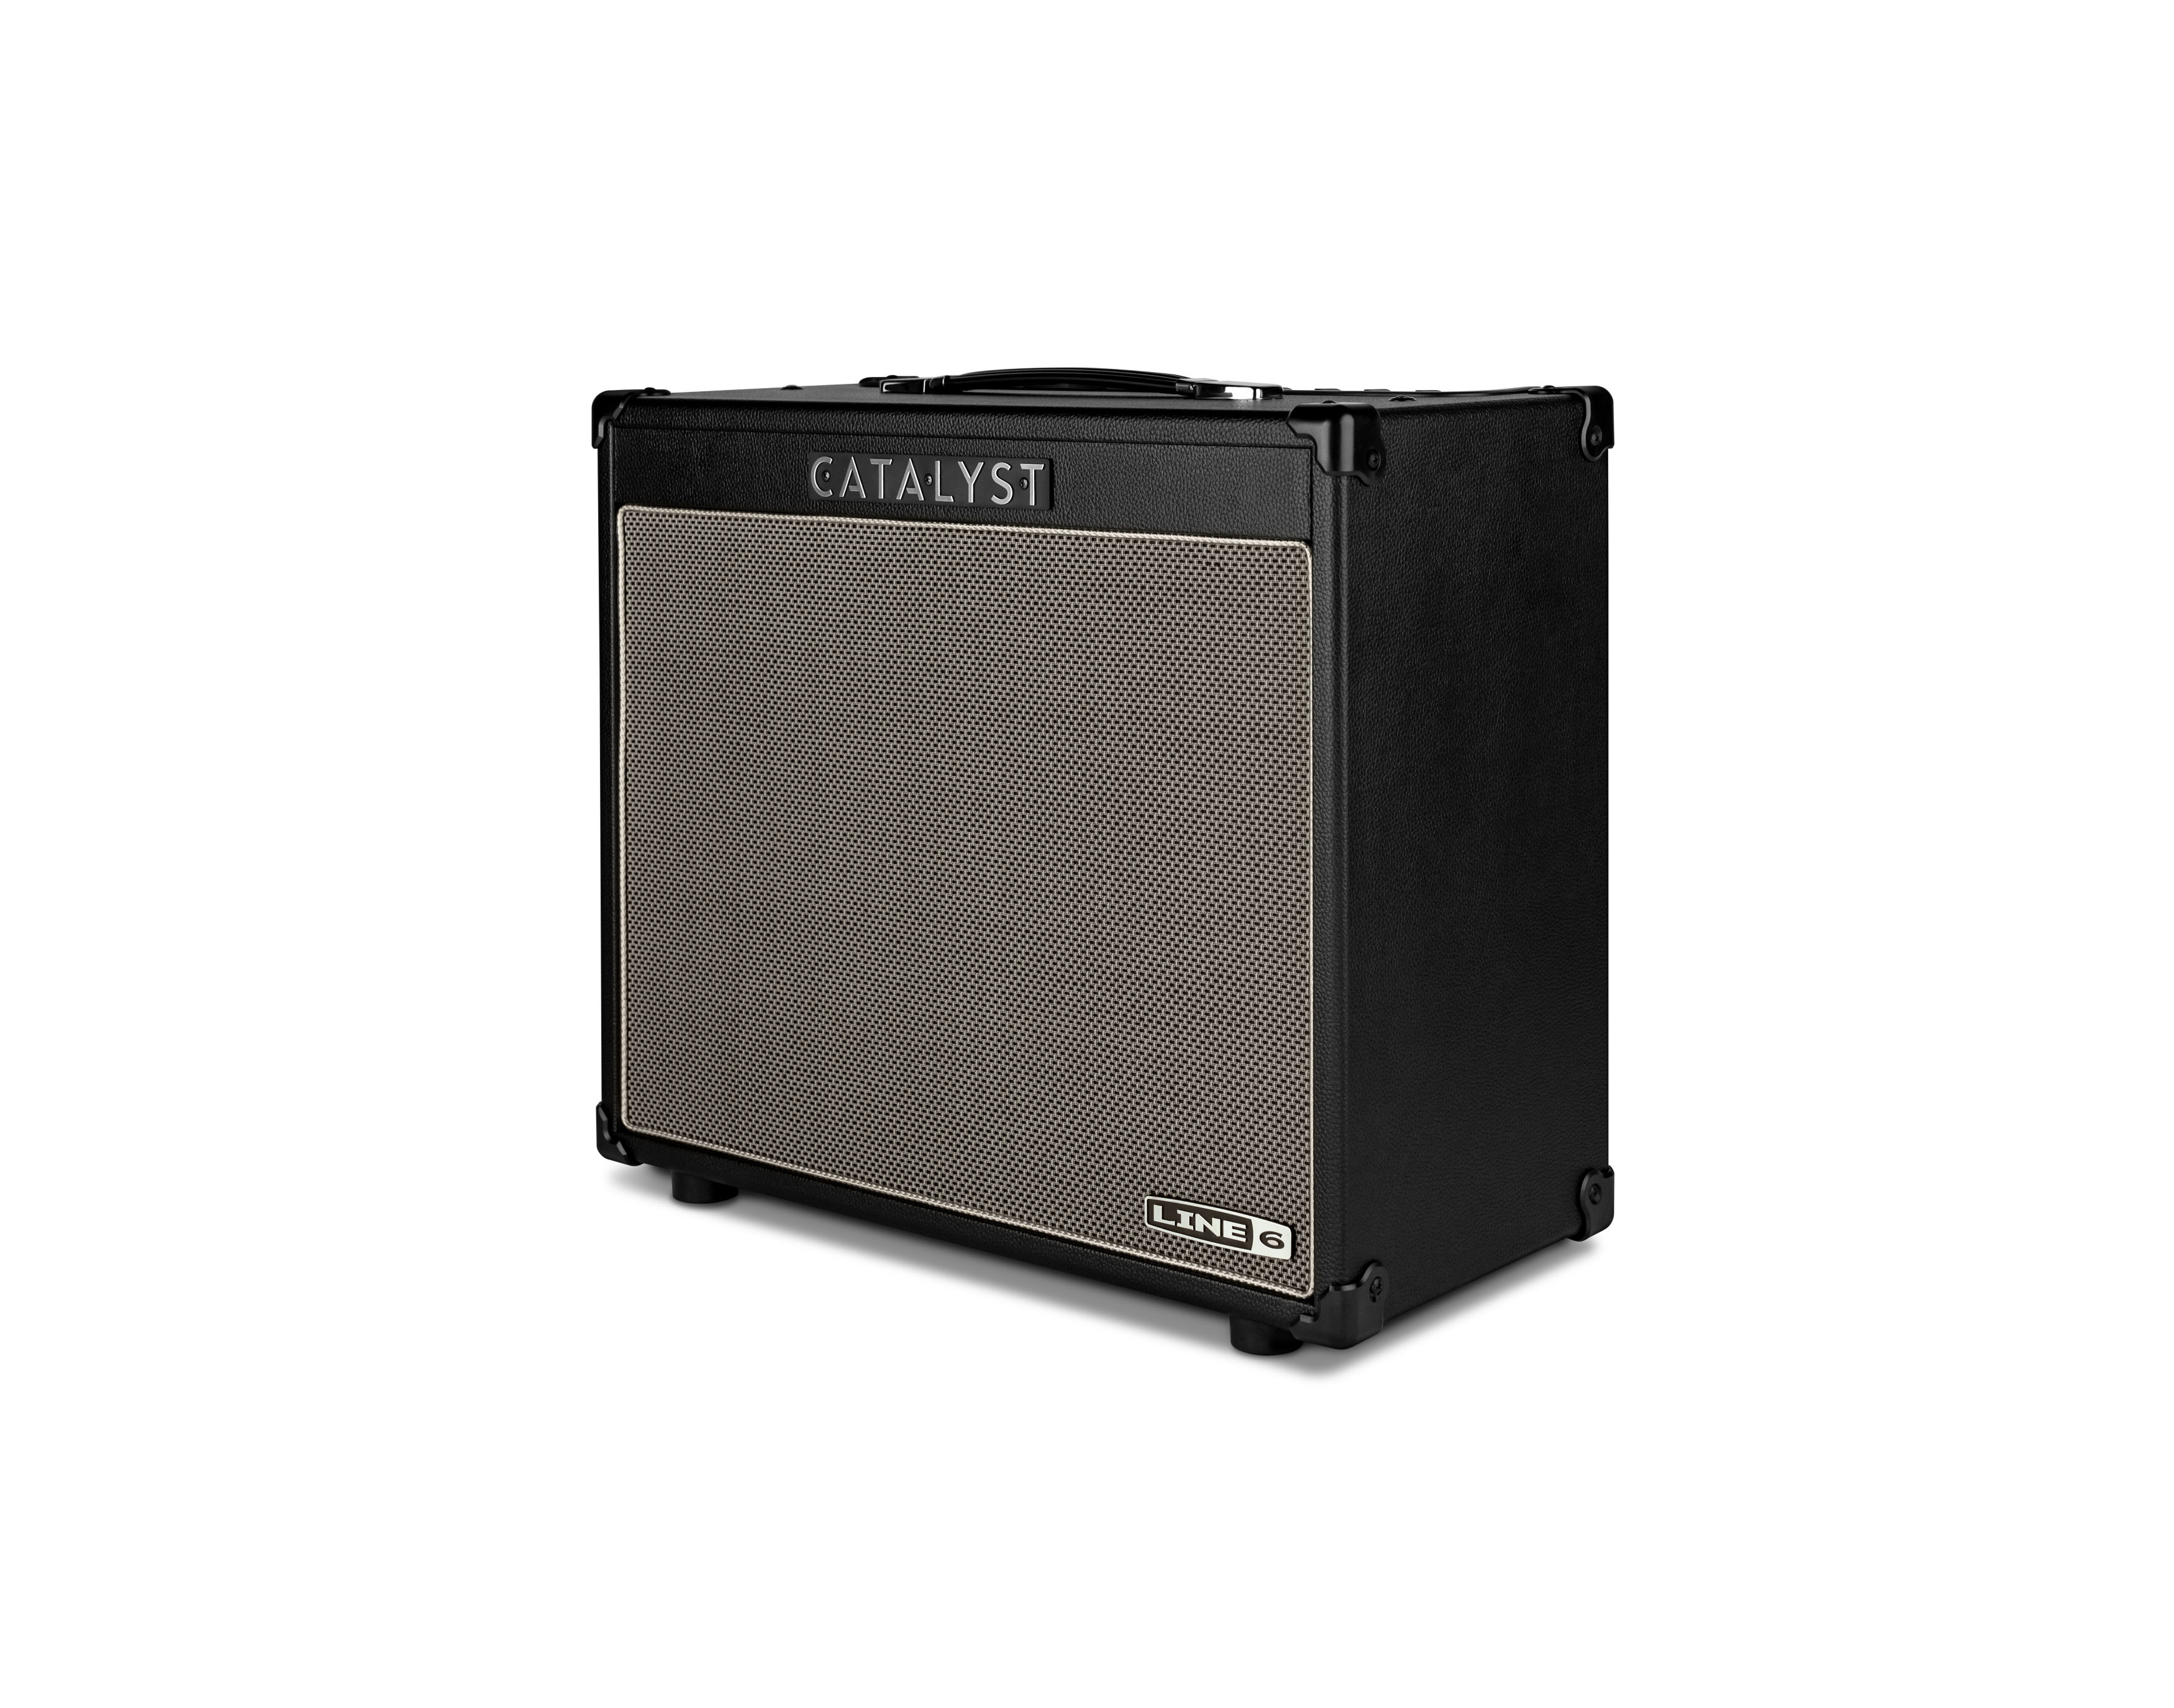 Line 6 Catalyst Cx Combo 100w 1x12 - Electric guitar combo amp - Variation 2